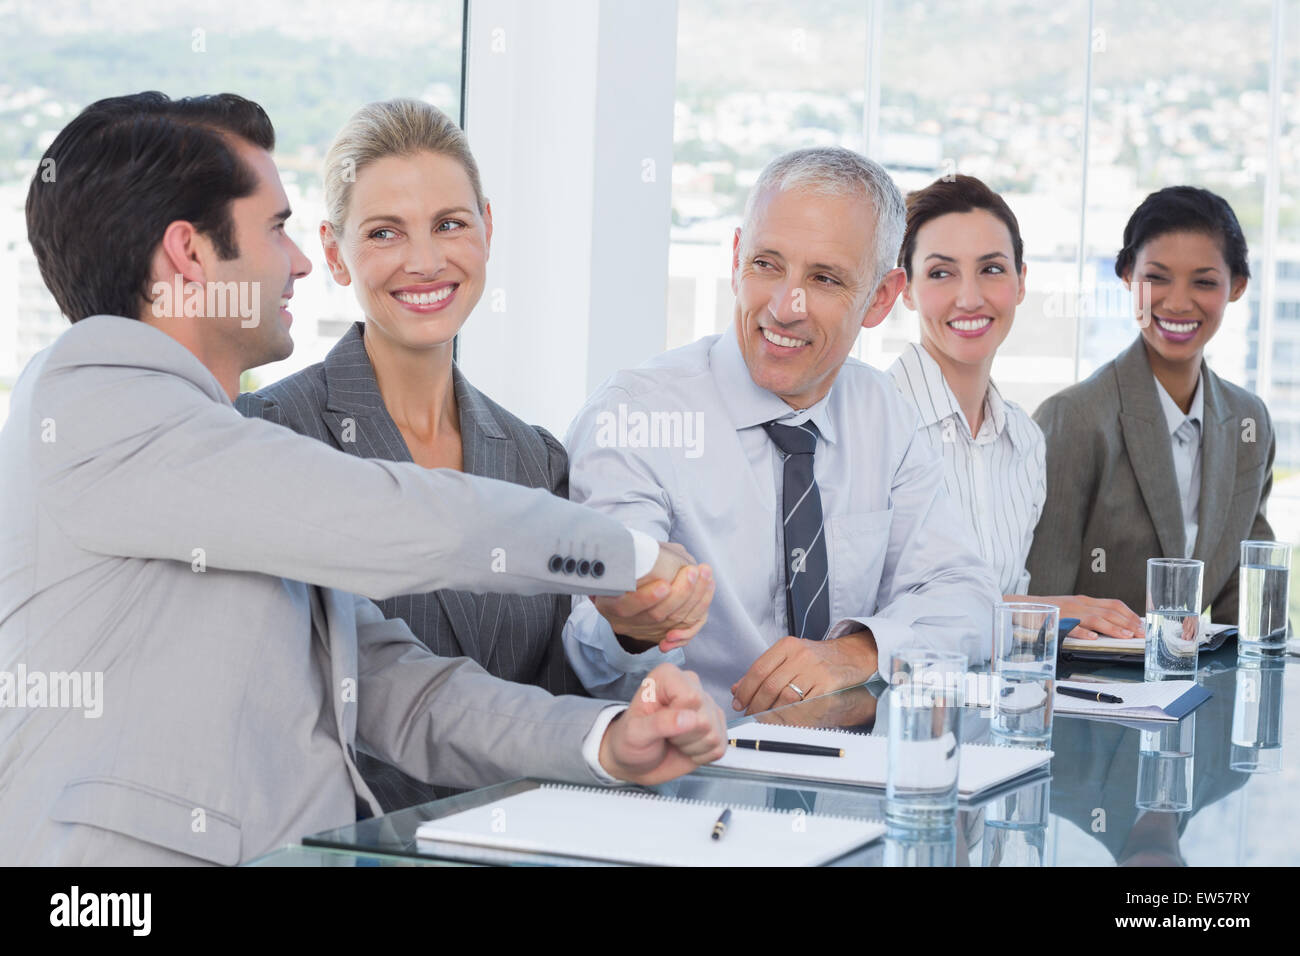 Businessmen shaking their hands during conference Stock Photo